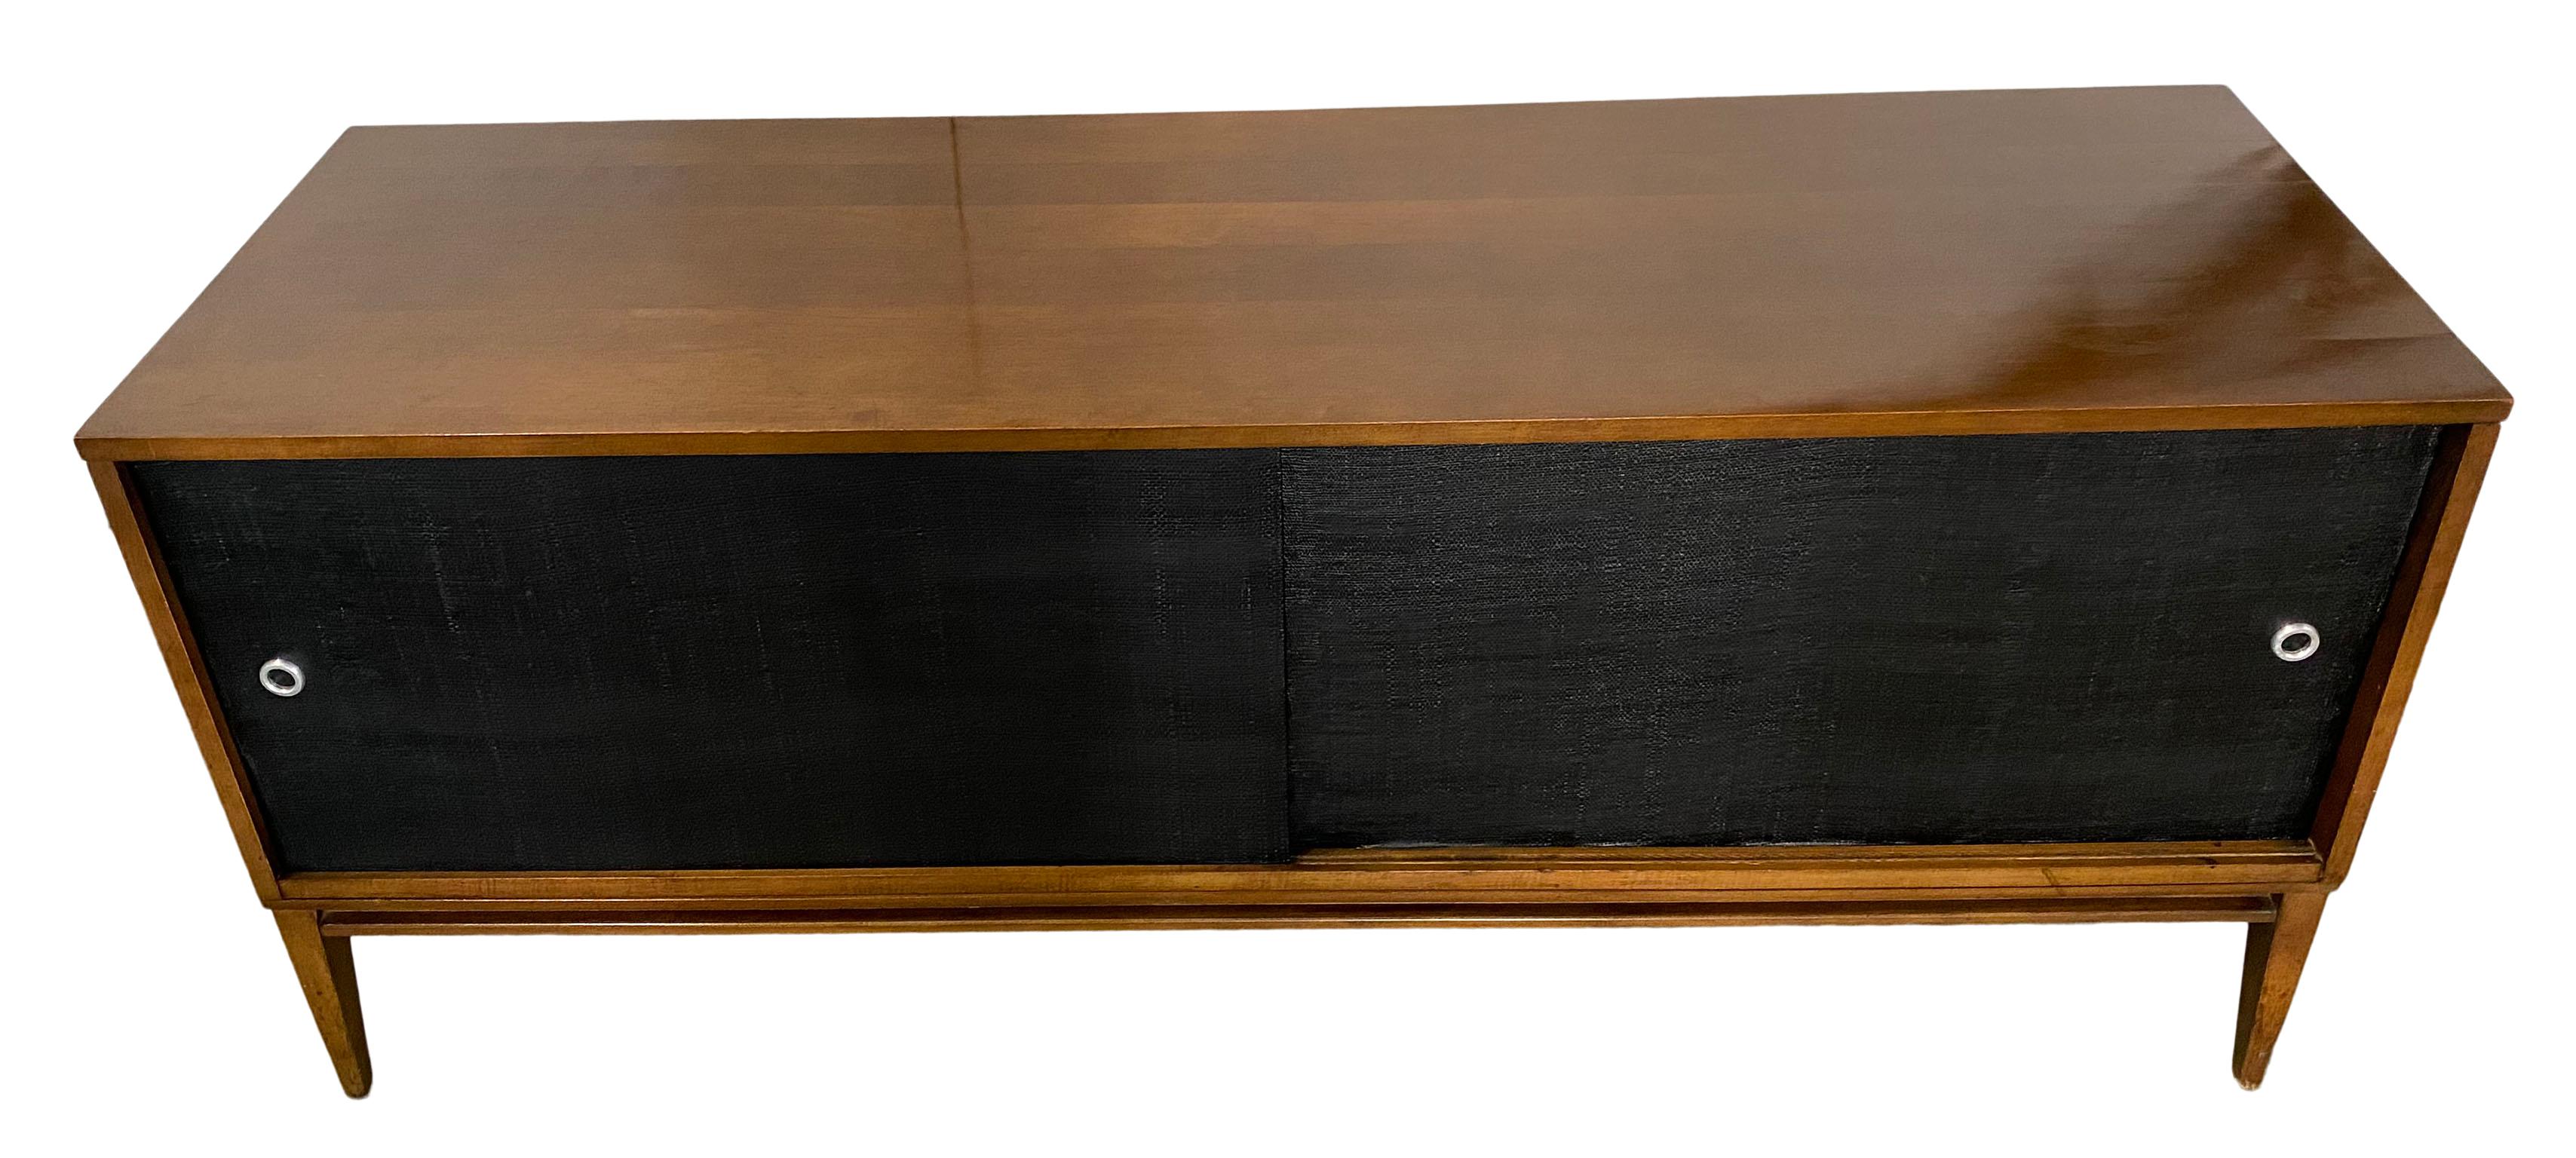 Beautiful midcentury low credenza cabinet with sliding doors by Paul McCobb circa 1950 planner group #1513 has 2 adjustable shelves with pins - solid maple construction has a dark walnut finish. All original Black cloth sliding front doors with